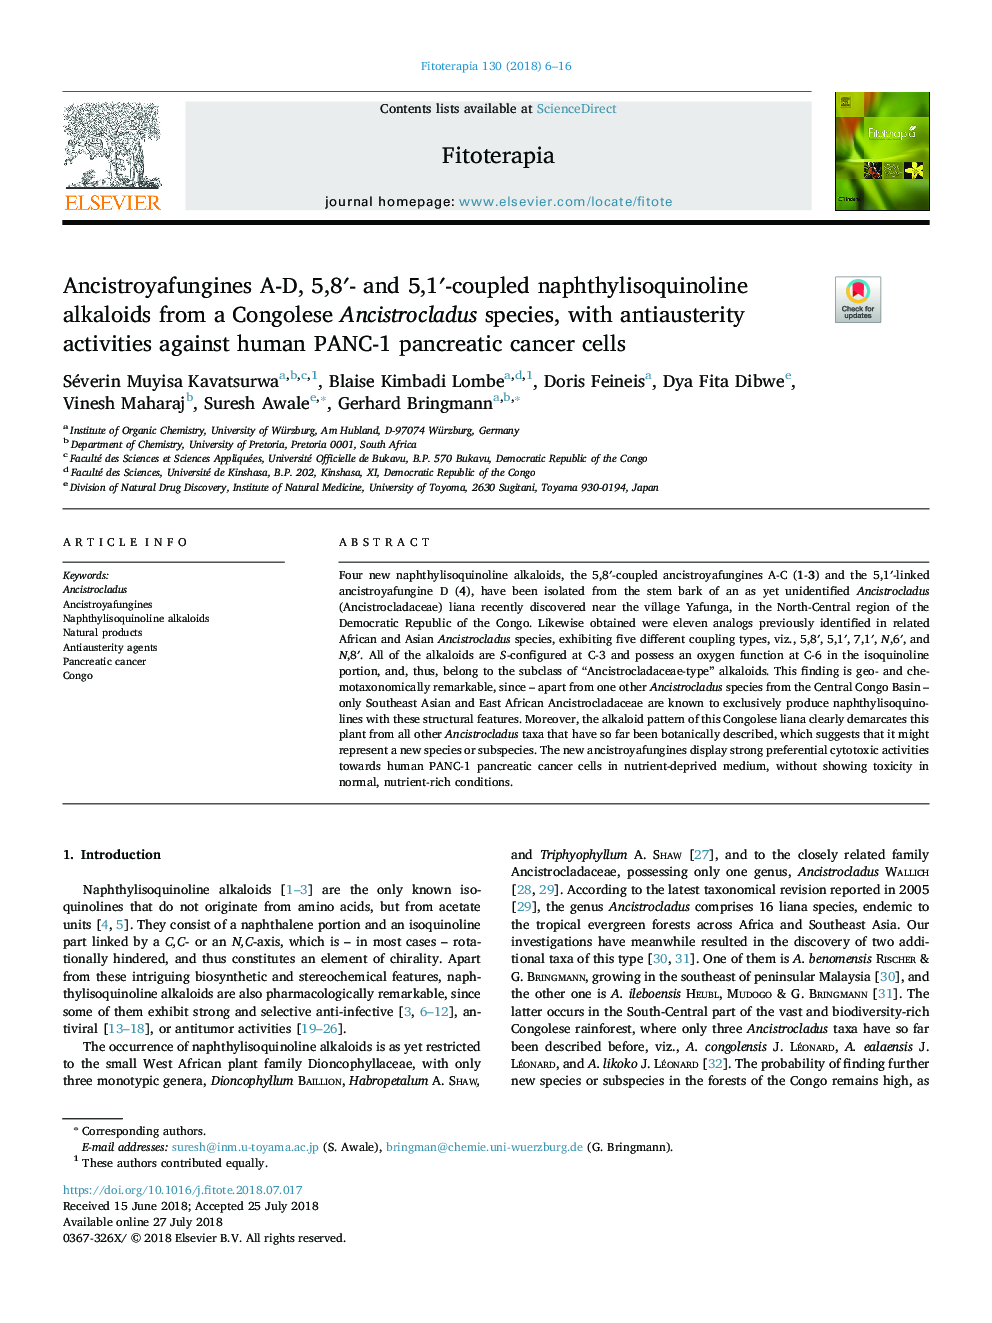 Ancistroyafungines A-D, 5,8â²- and 5,1â²-coupled naphthylisoquinoline alkaloids from a Congolese Ancistrocladus species, with antiausterity activities against human PANC-1 pancreatic cancer cells